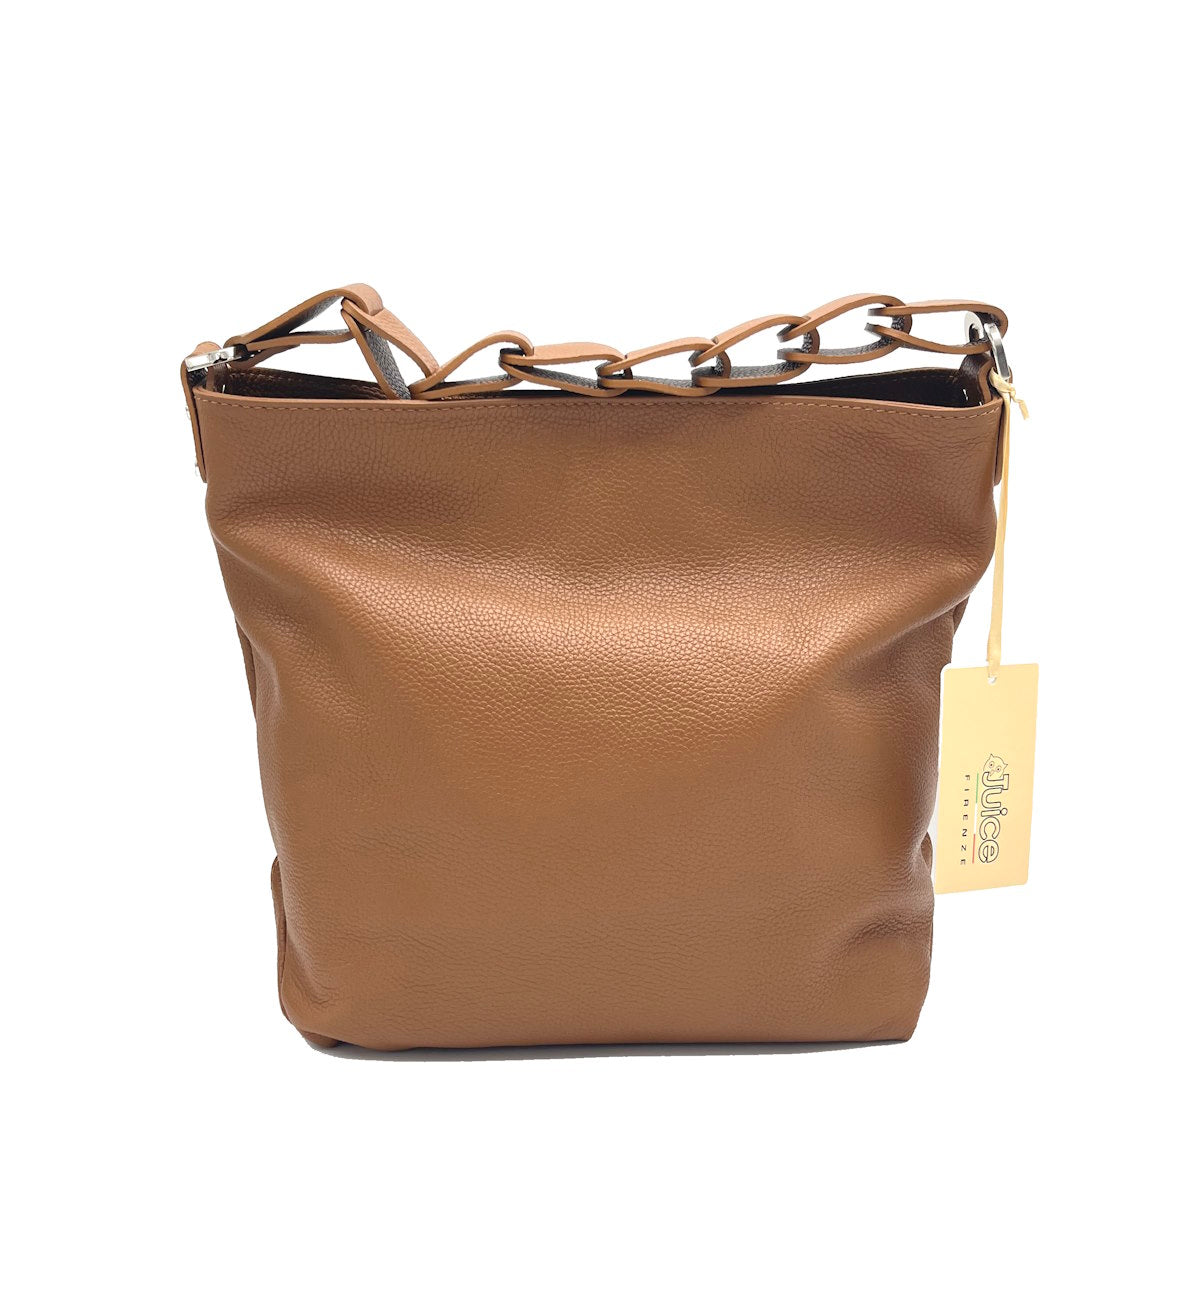 Genuine leather shoulder bag, for women, Made in Italy, art. 112420